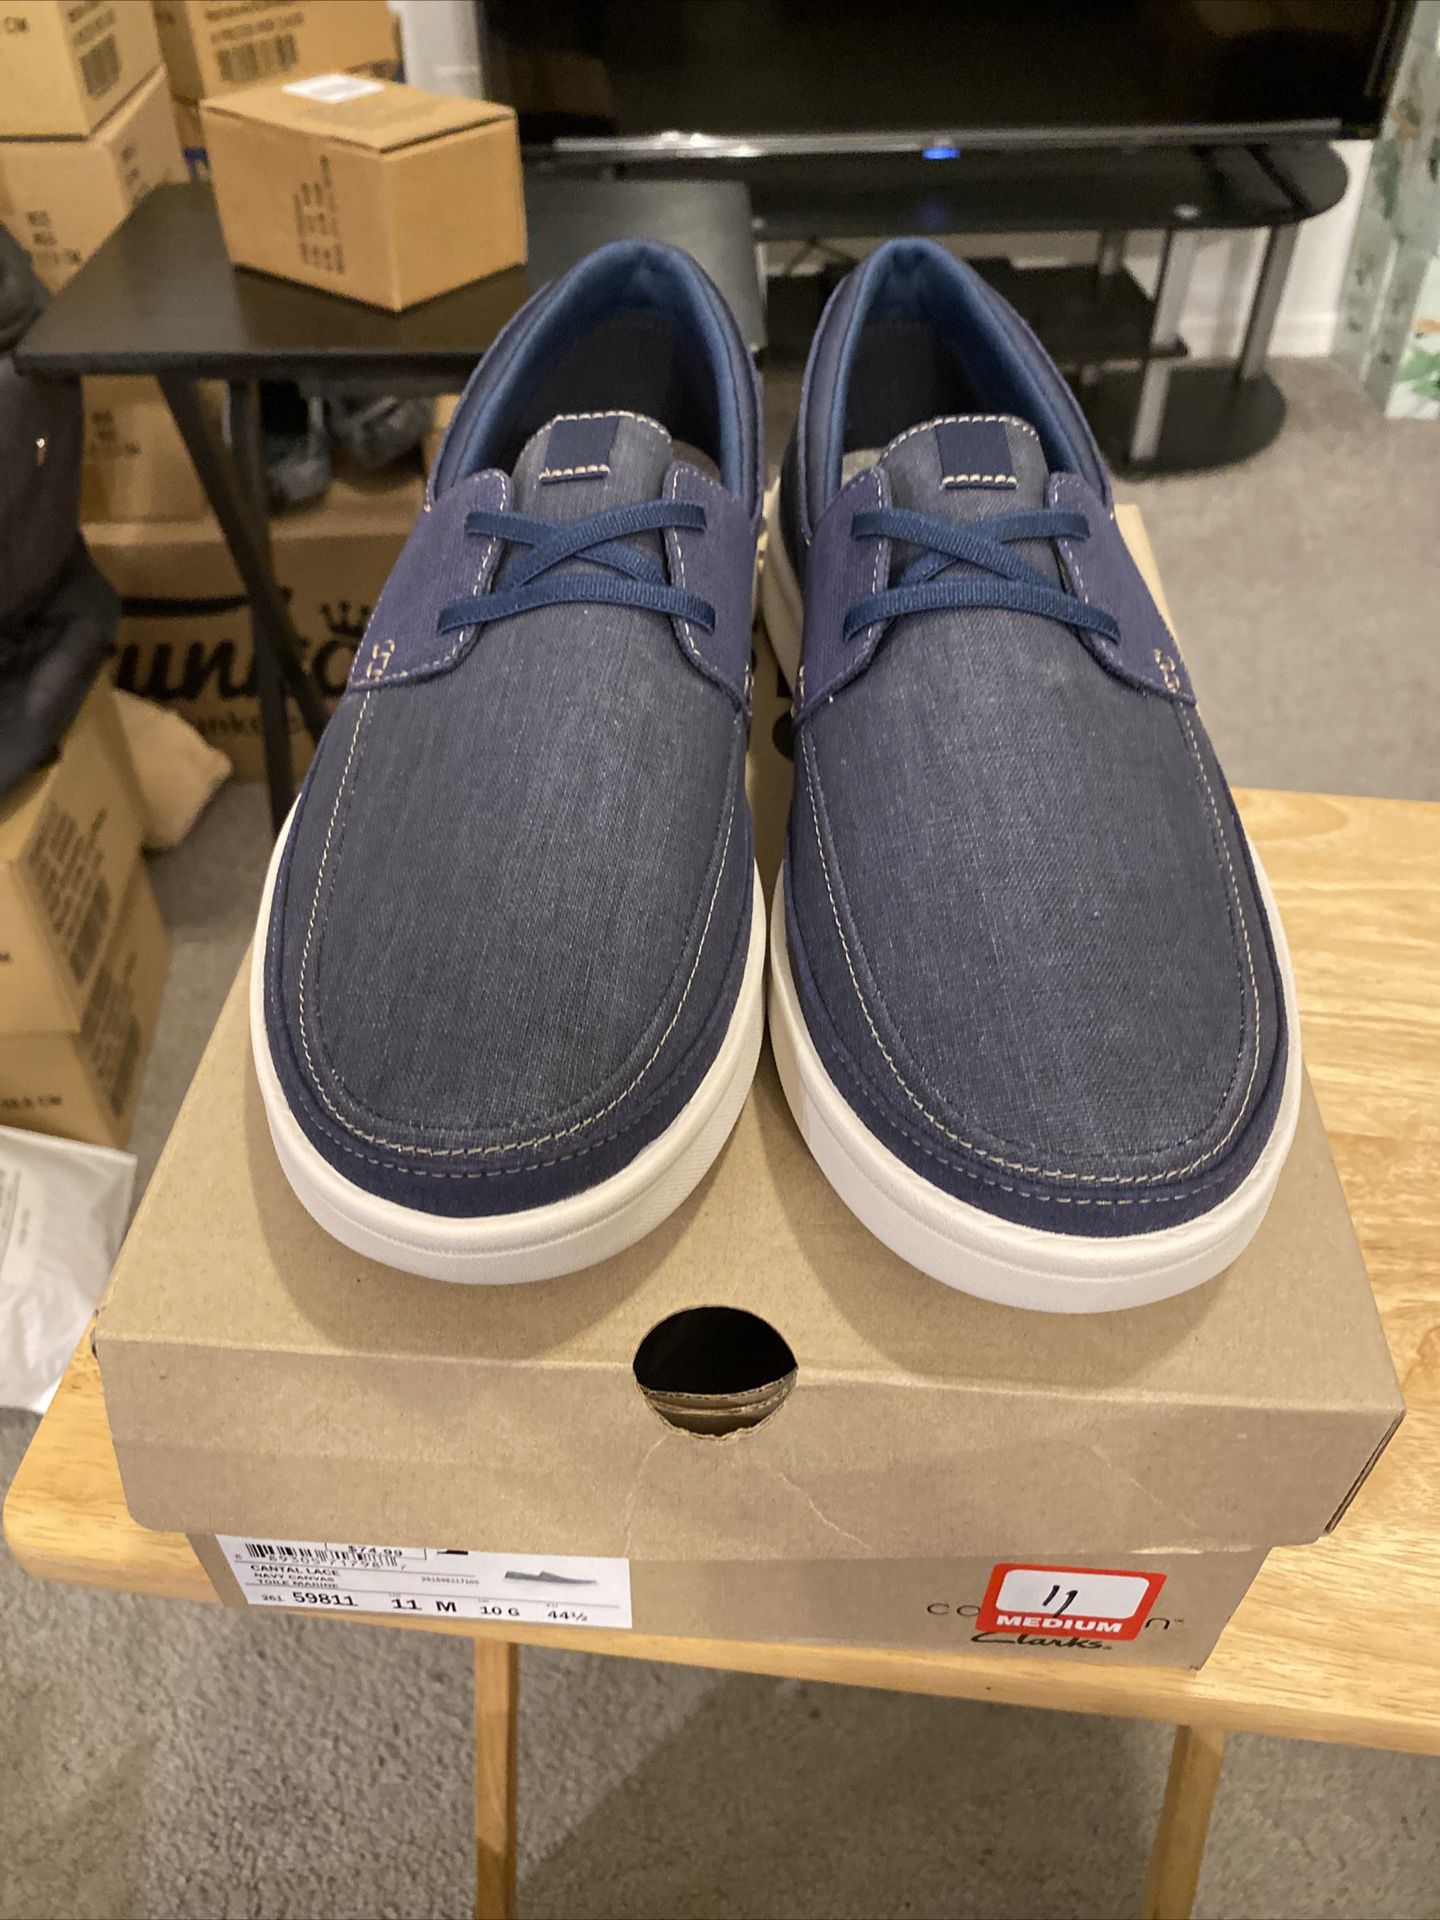 Clarks Men's Cantal Lace Sneaker, Navy Canvas, Size, 11 M US / 10 UK / 44.5 for Sale in Hill, FL - OfferUp